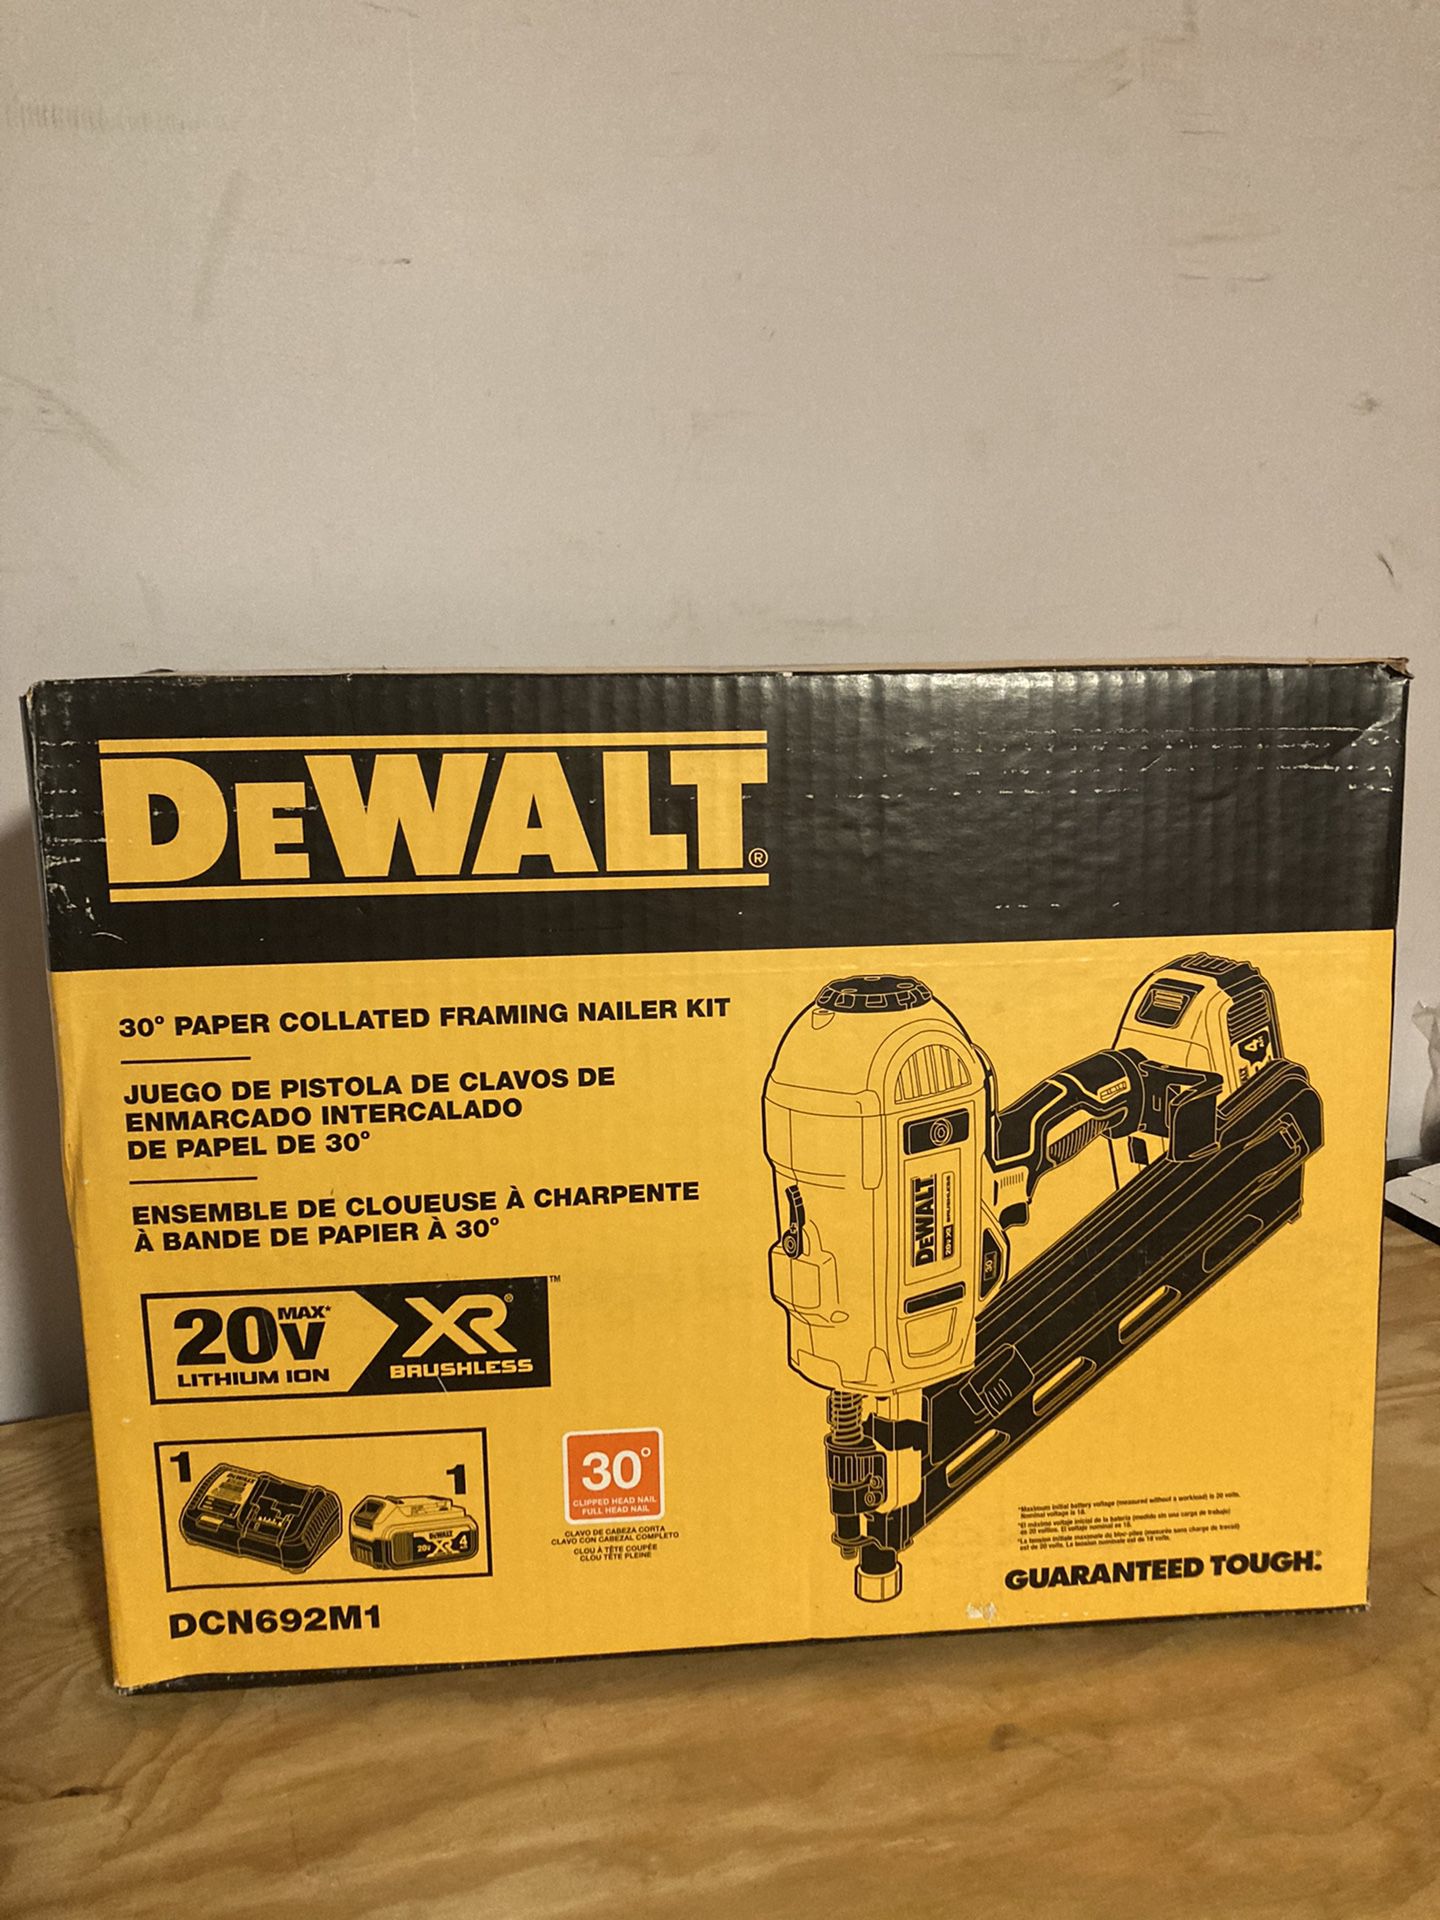 DEWALT 20V MAX XR Brushless 2-Speed 30° Paper Collated Framing Nailer KIT  for Sale in Queens, NY OfferUp